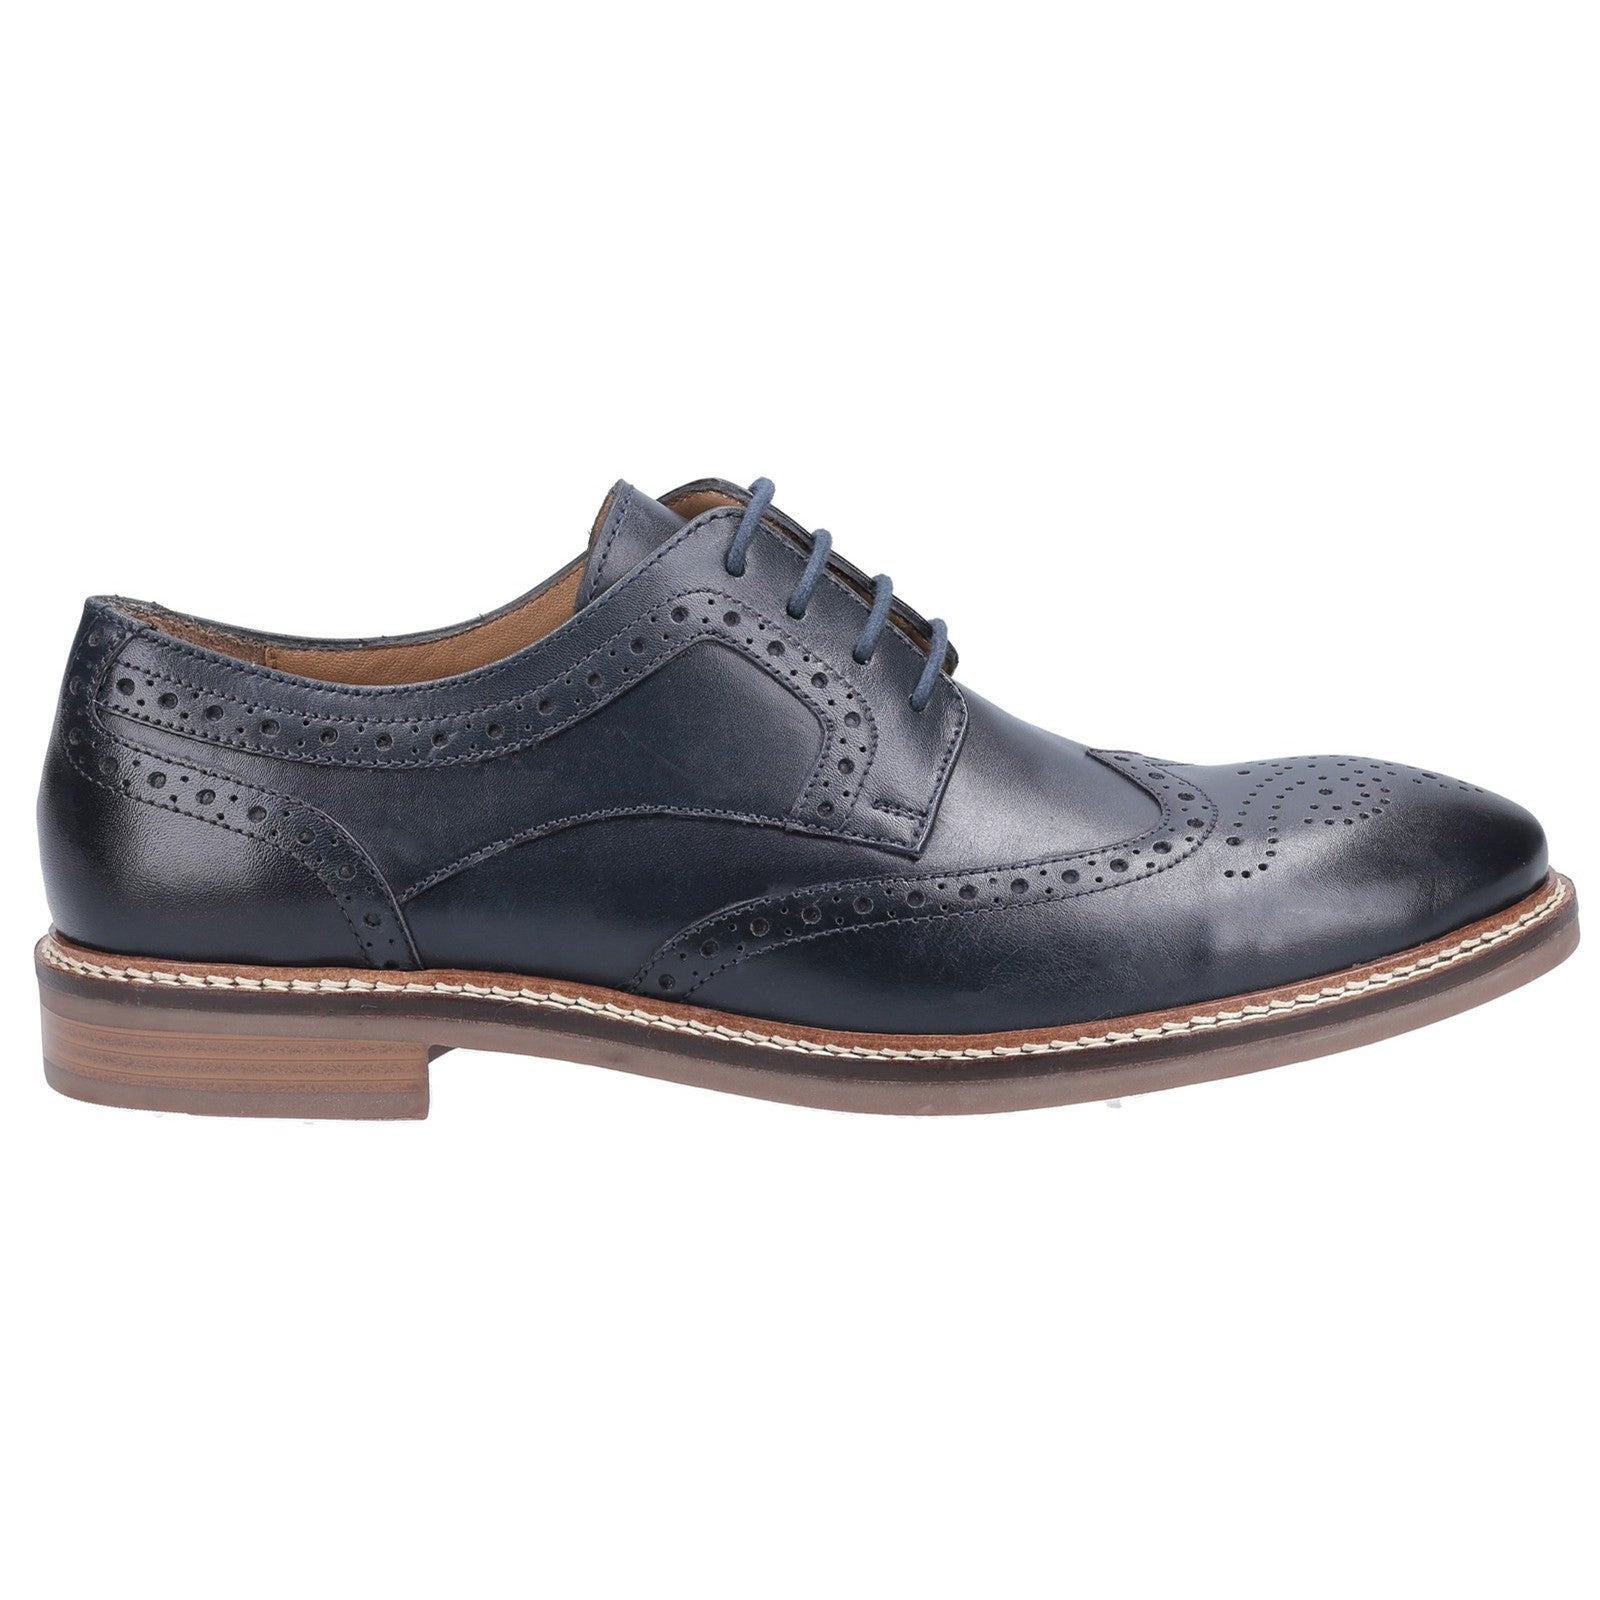 Hush Puppies Mens Bryson Leather Shoes - Navy